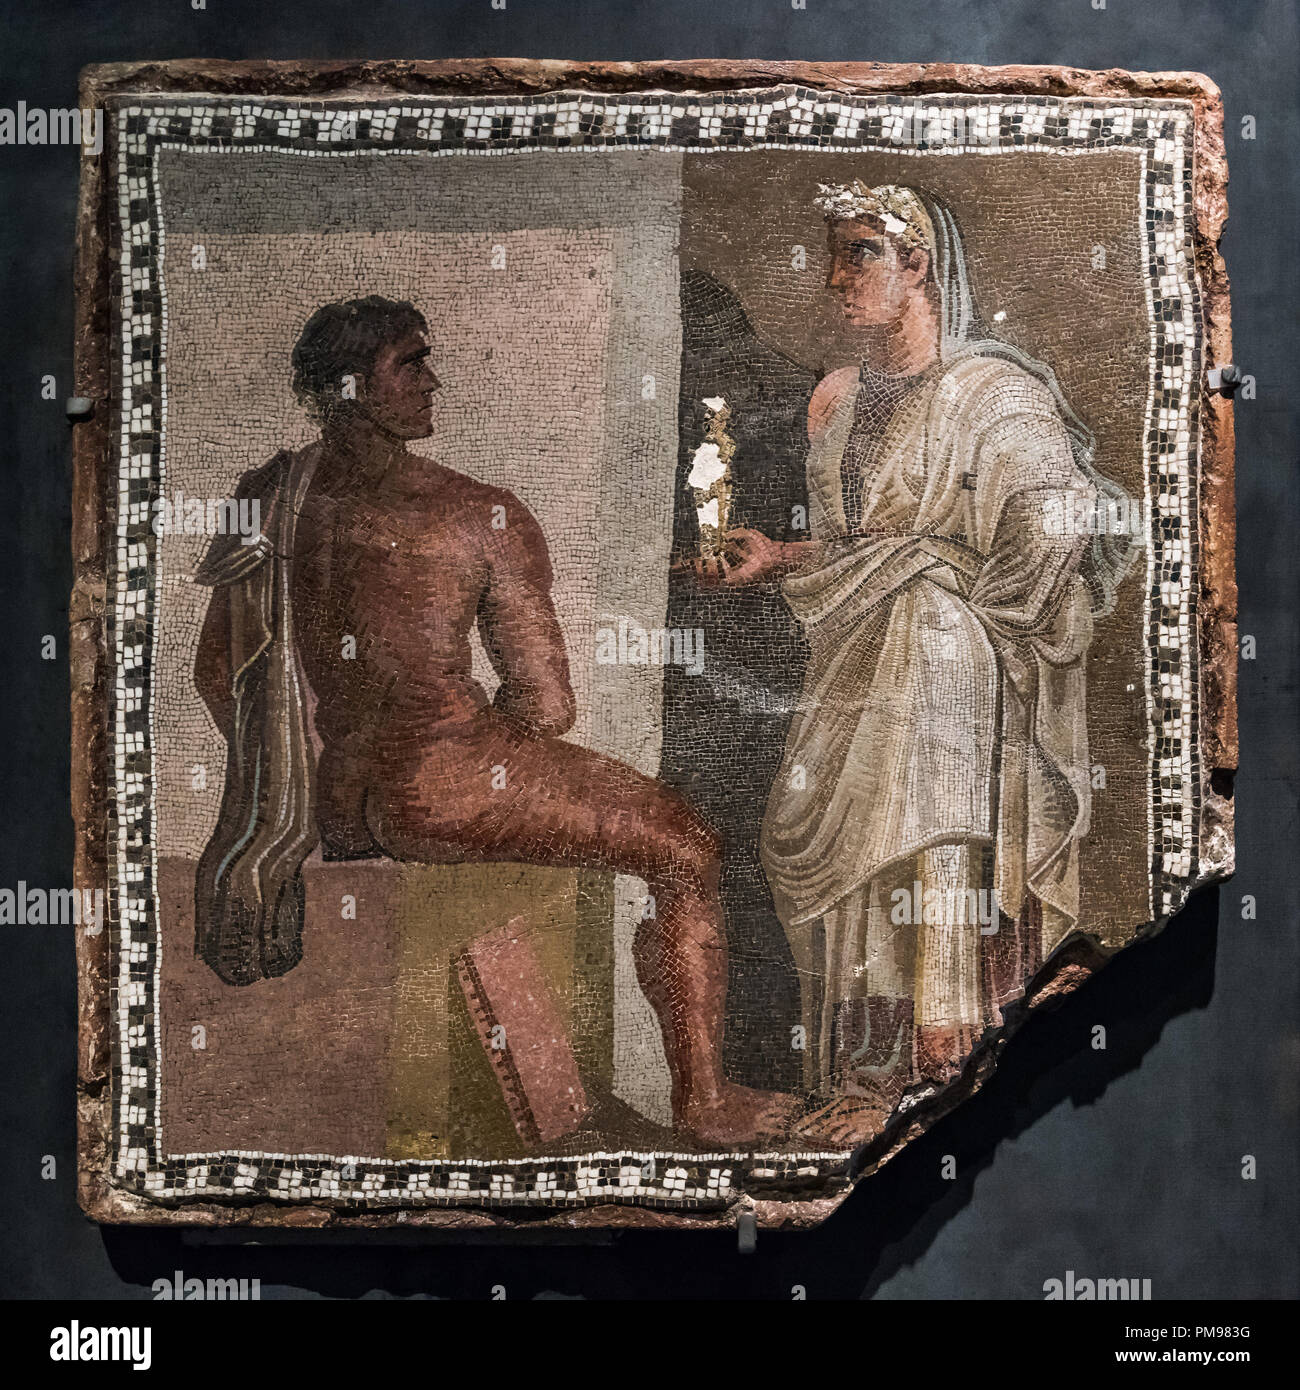 Mosaic with Orestes and Iphigenia, Capitoline Museums, Rome, Italy Stock Photo